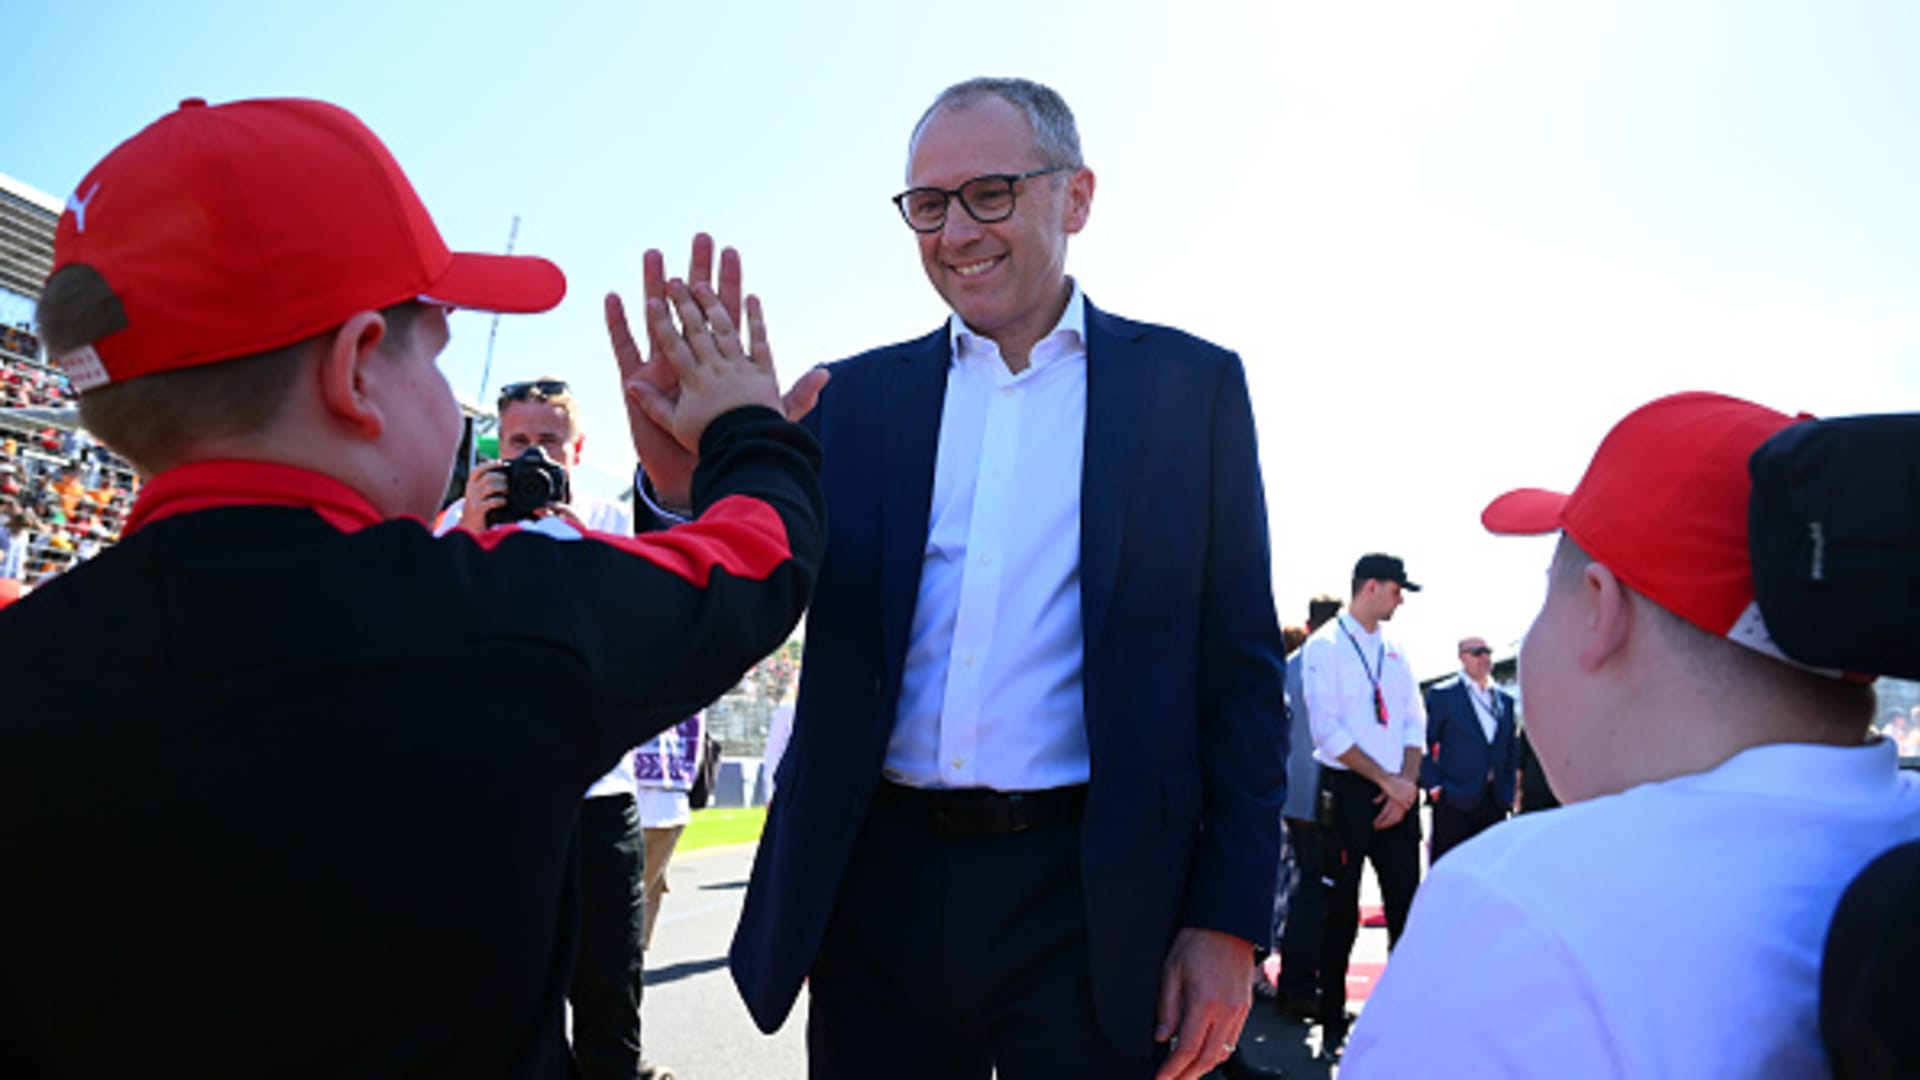 Stefano Domenicali, CEO of the Formula One Group, interacts with Grid Kids on the grid prior to the F1 Grand Prix of Australia at Albert Park Circuit on March 24, 2024.